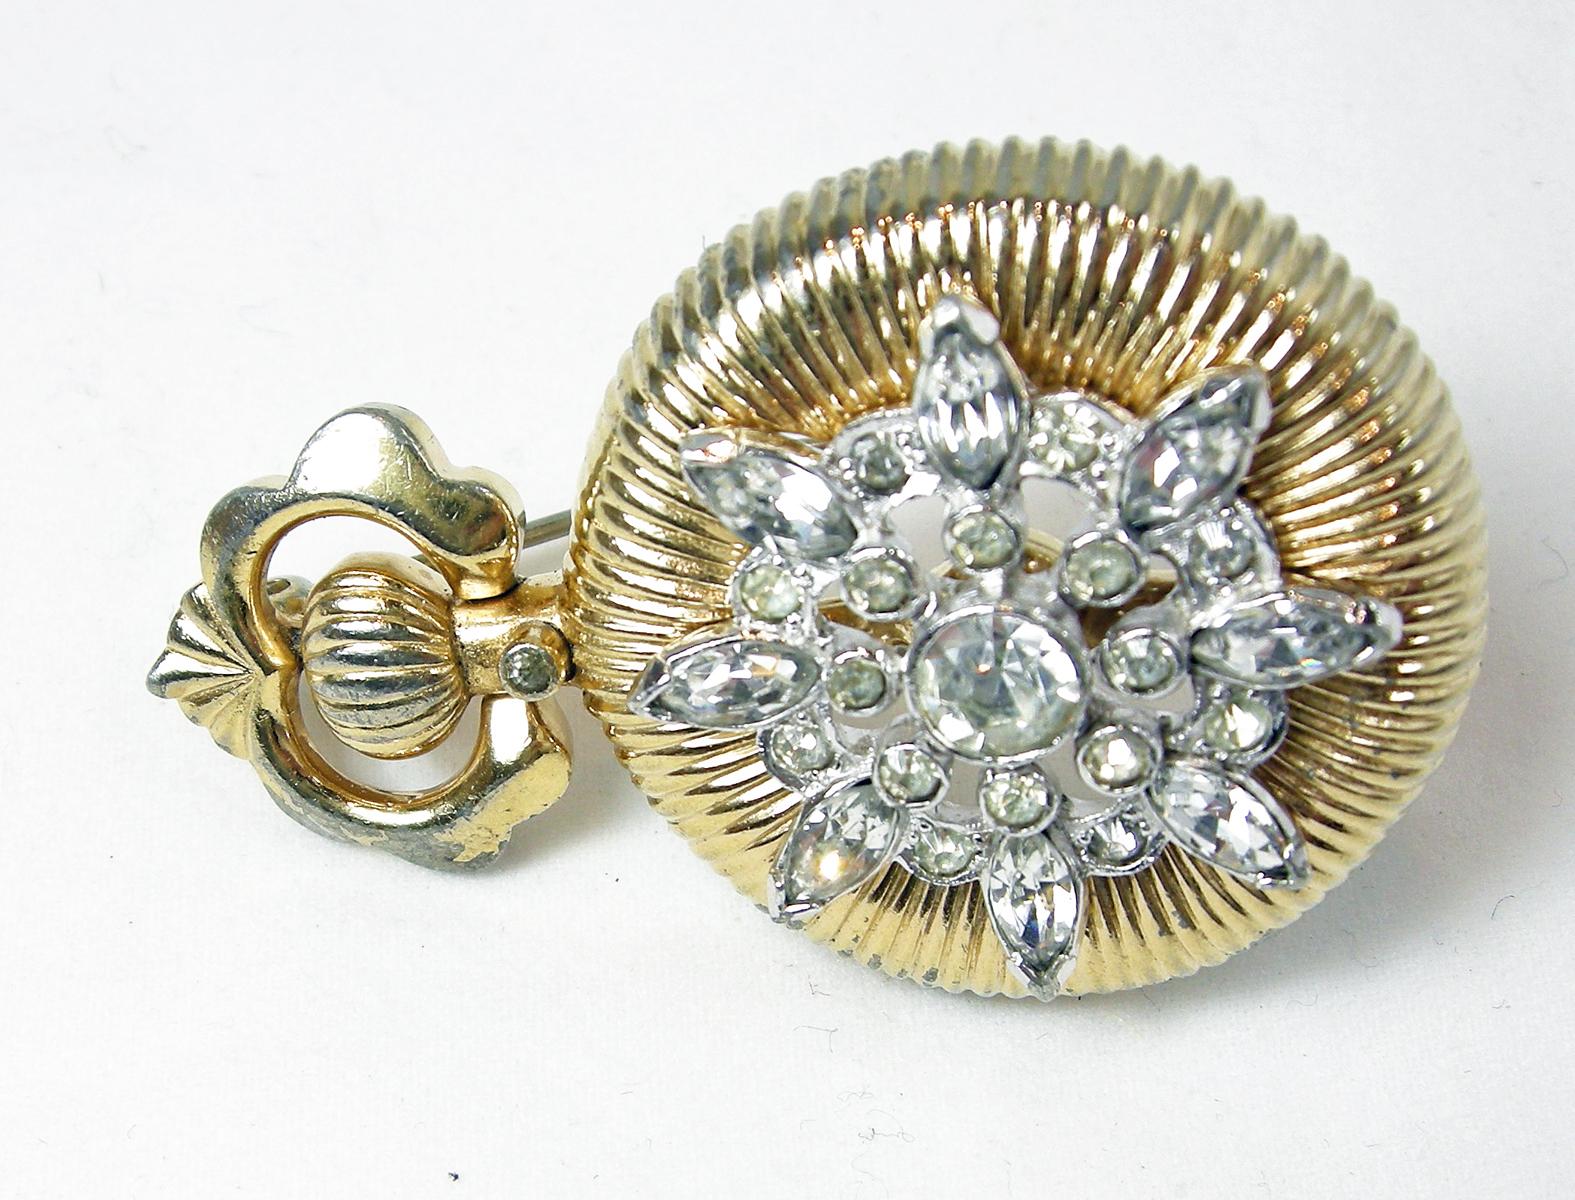 This vintage Mazer set was created to look like clock in a gold tone setting.  Clear crystals in a starburst design adorn the center of the brooch and earrings. The brooch measures 2” x 1-1/4” and the matching clip earrings are 1-1/4” x 3/4”.  It is